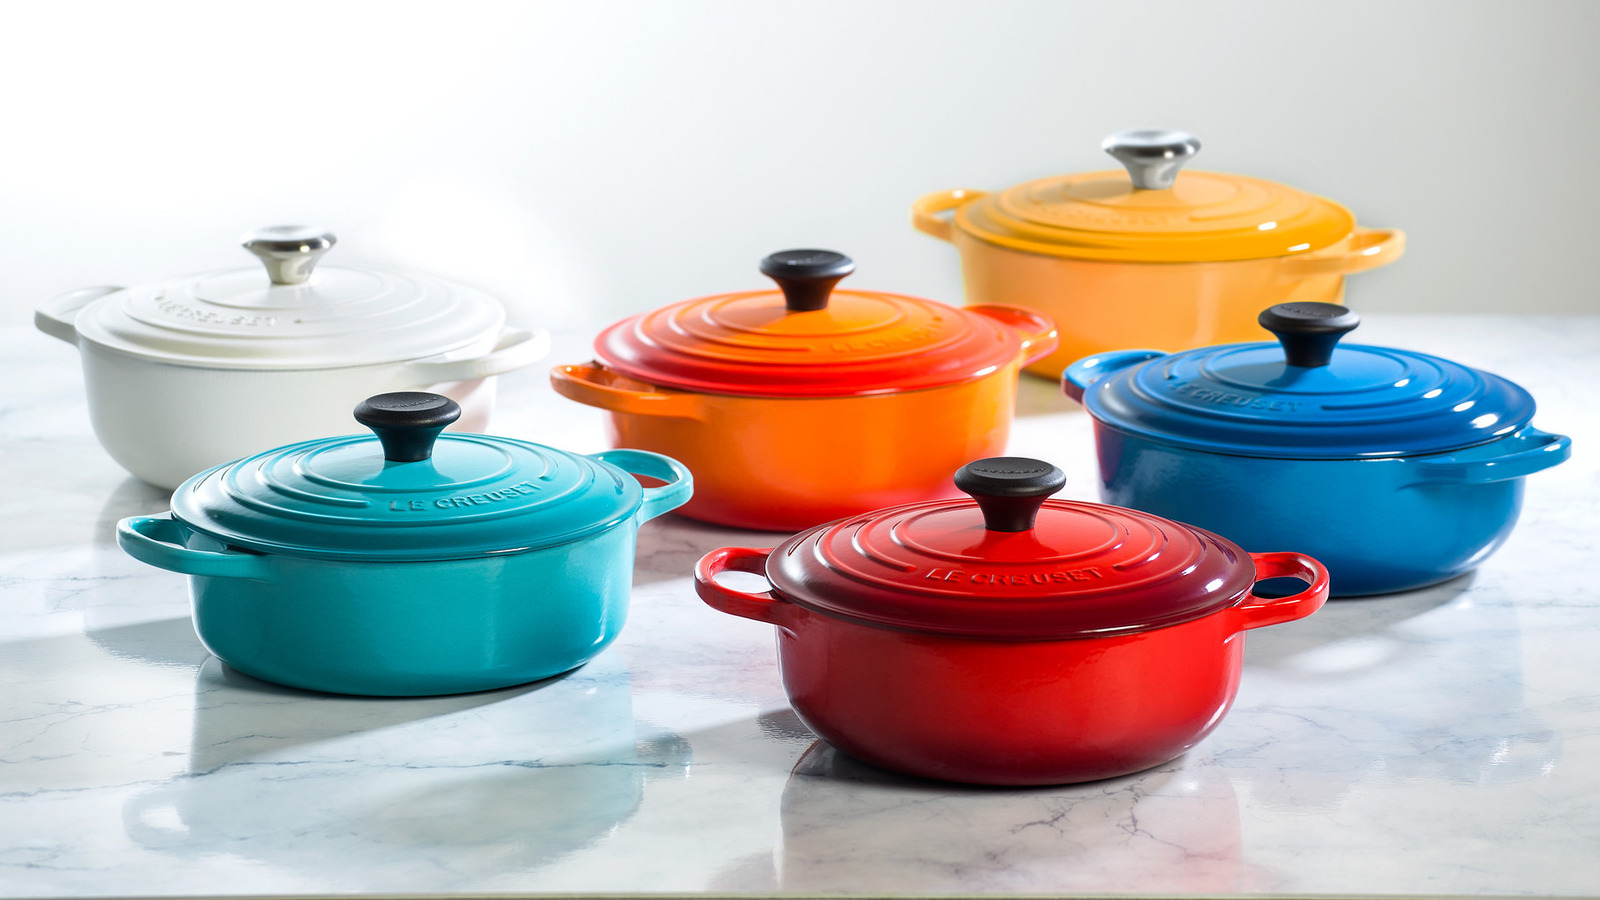 Le Creuset's New Fall Color Release Is Surprisingly Unseasonal